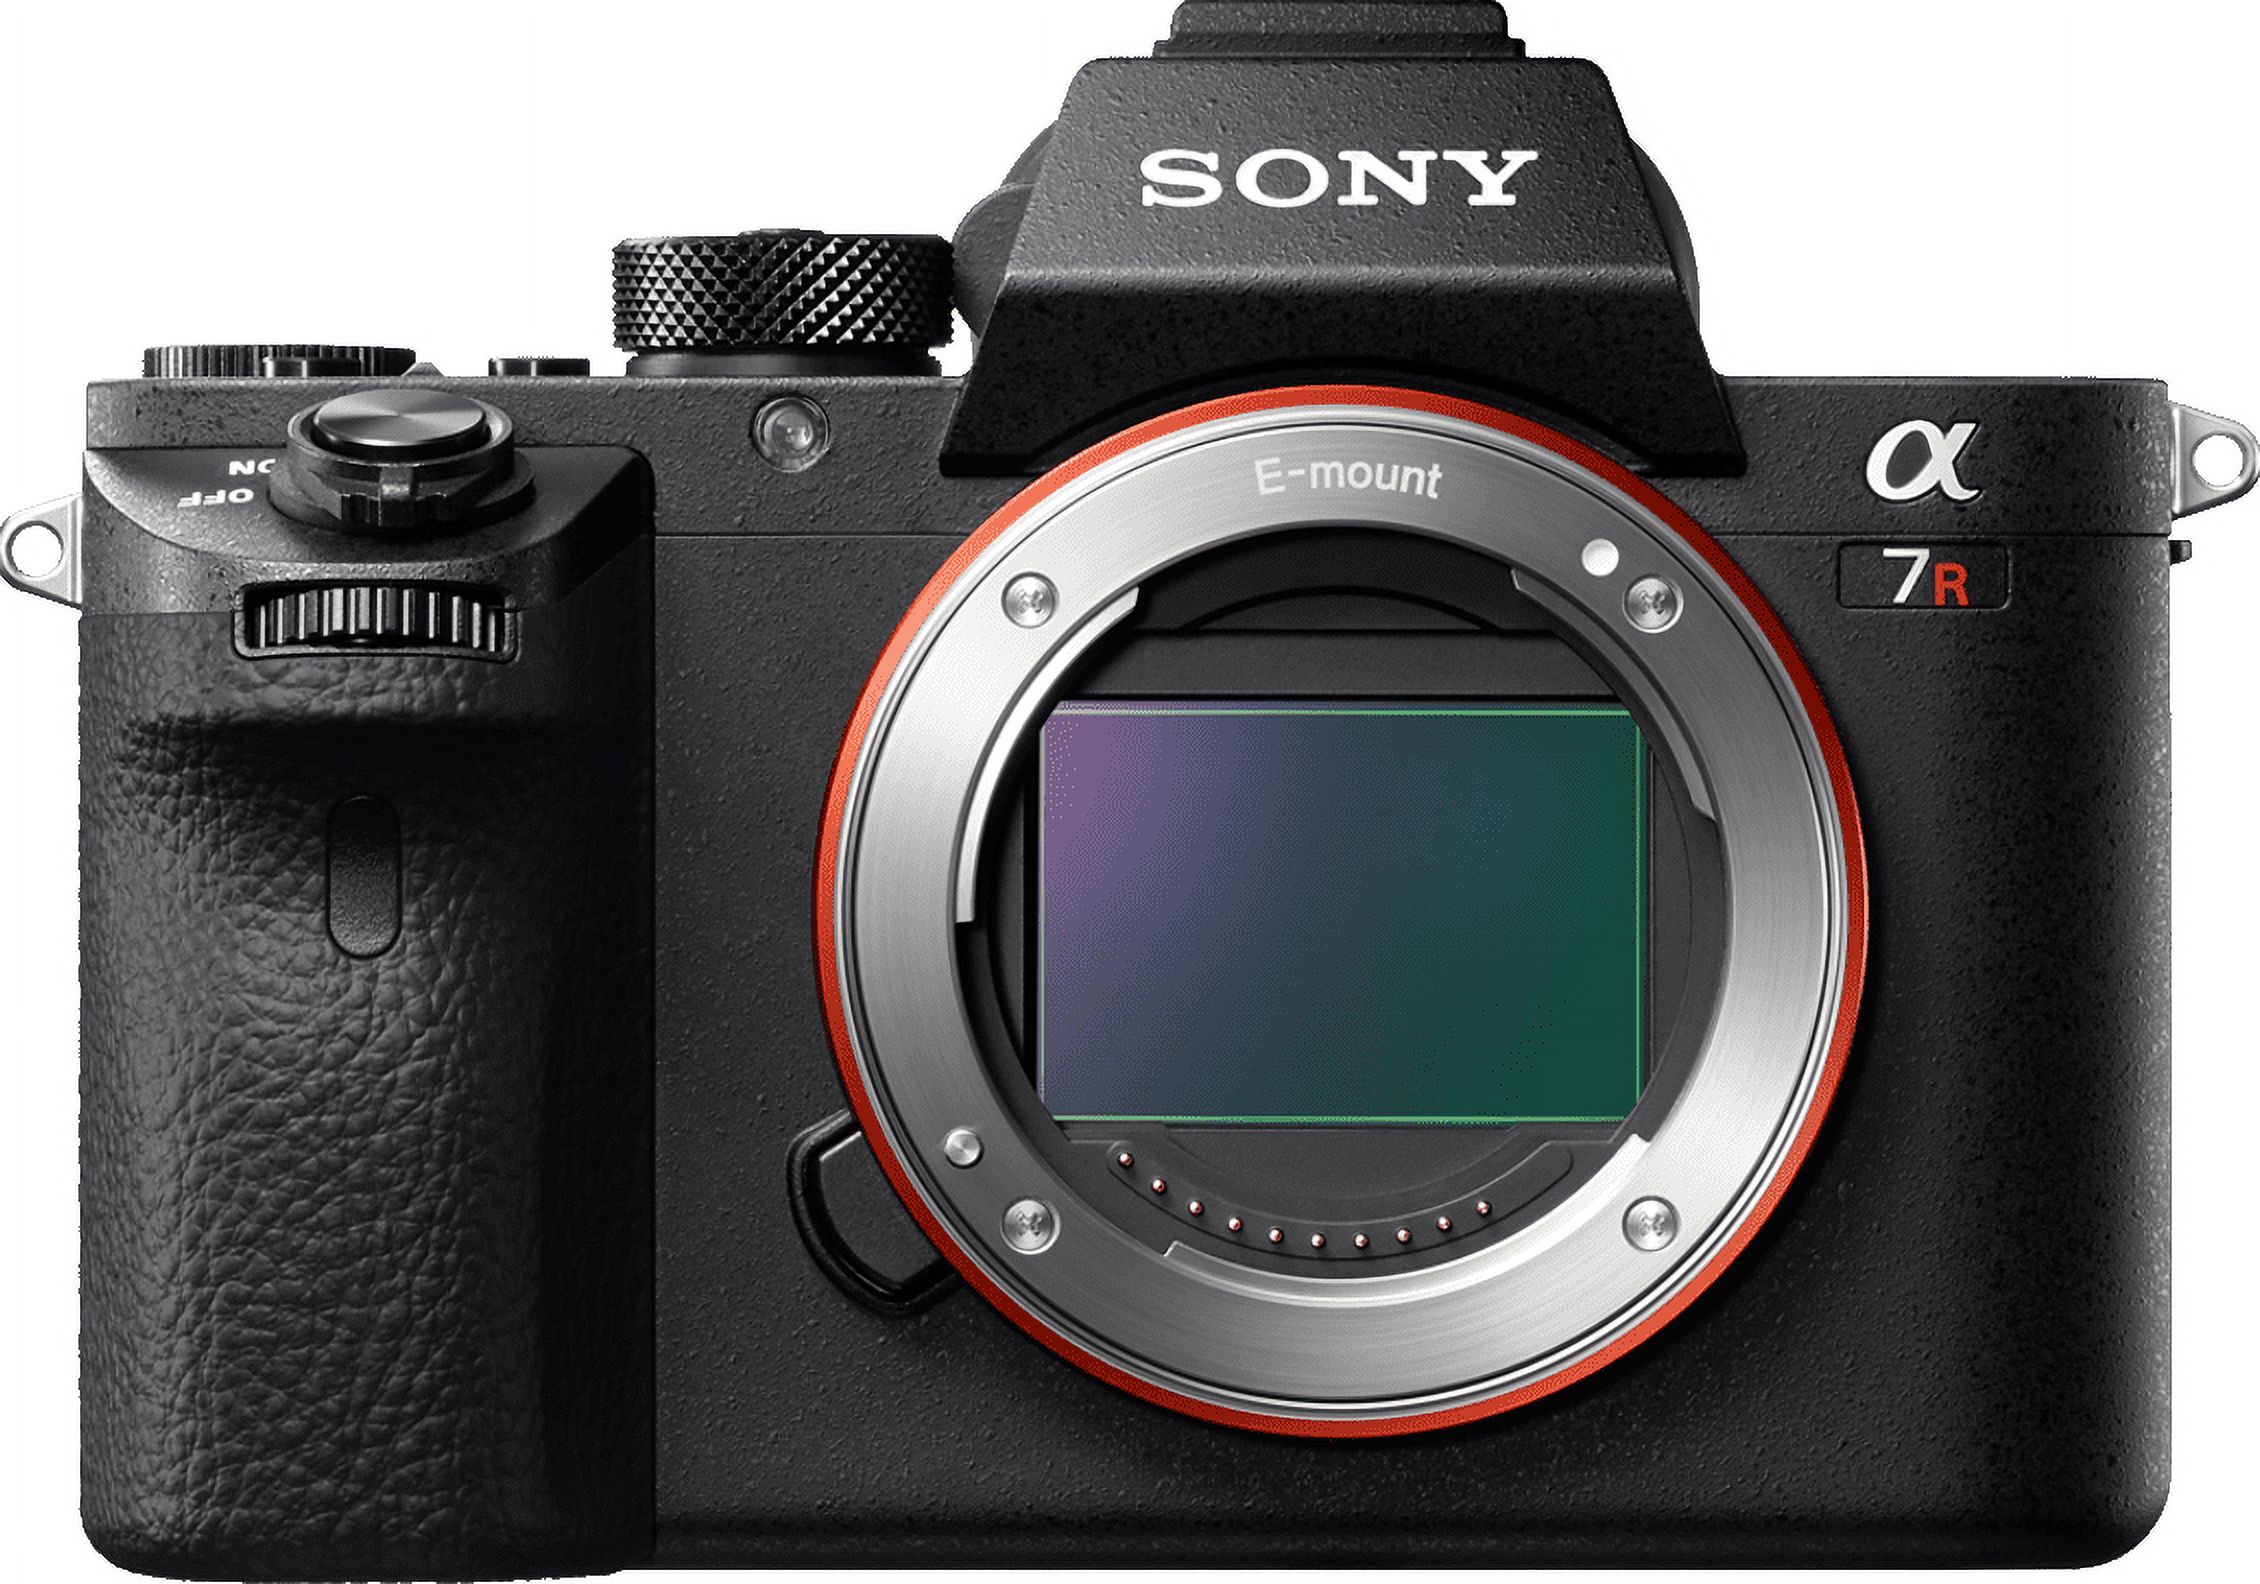 Sony Alpha a7R II Full-frame Mirrorless Interchangeable-Lens Camera - Black - image 1 of 5